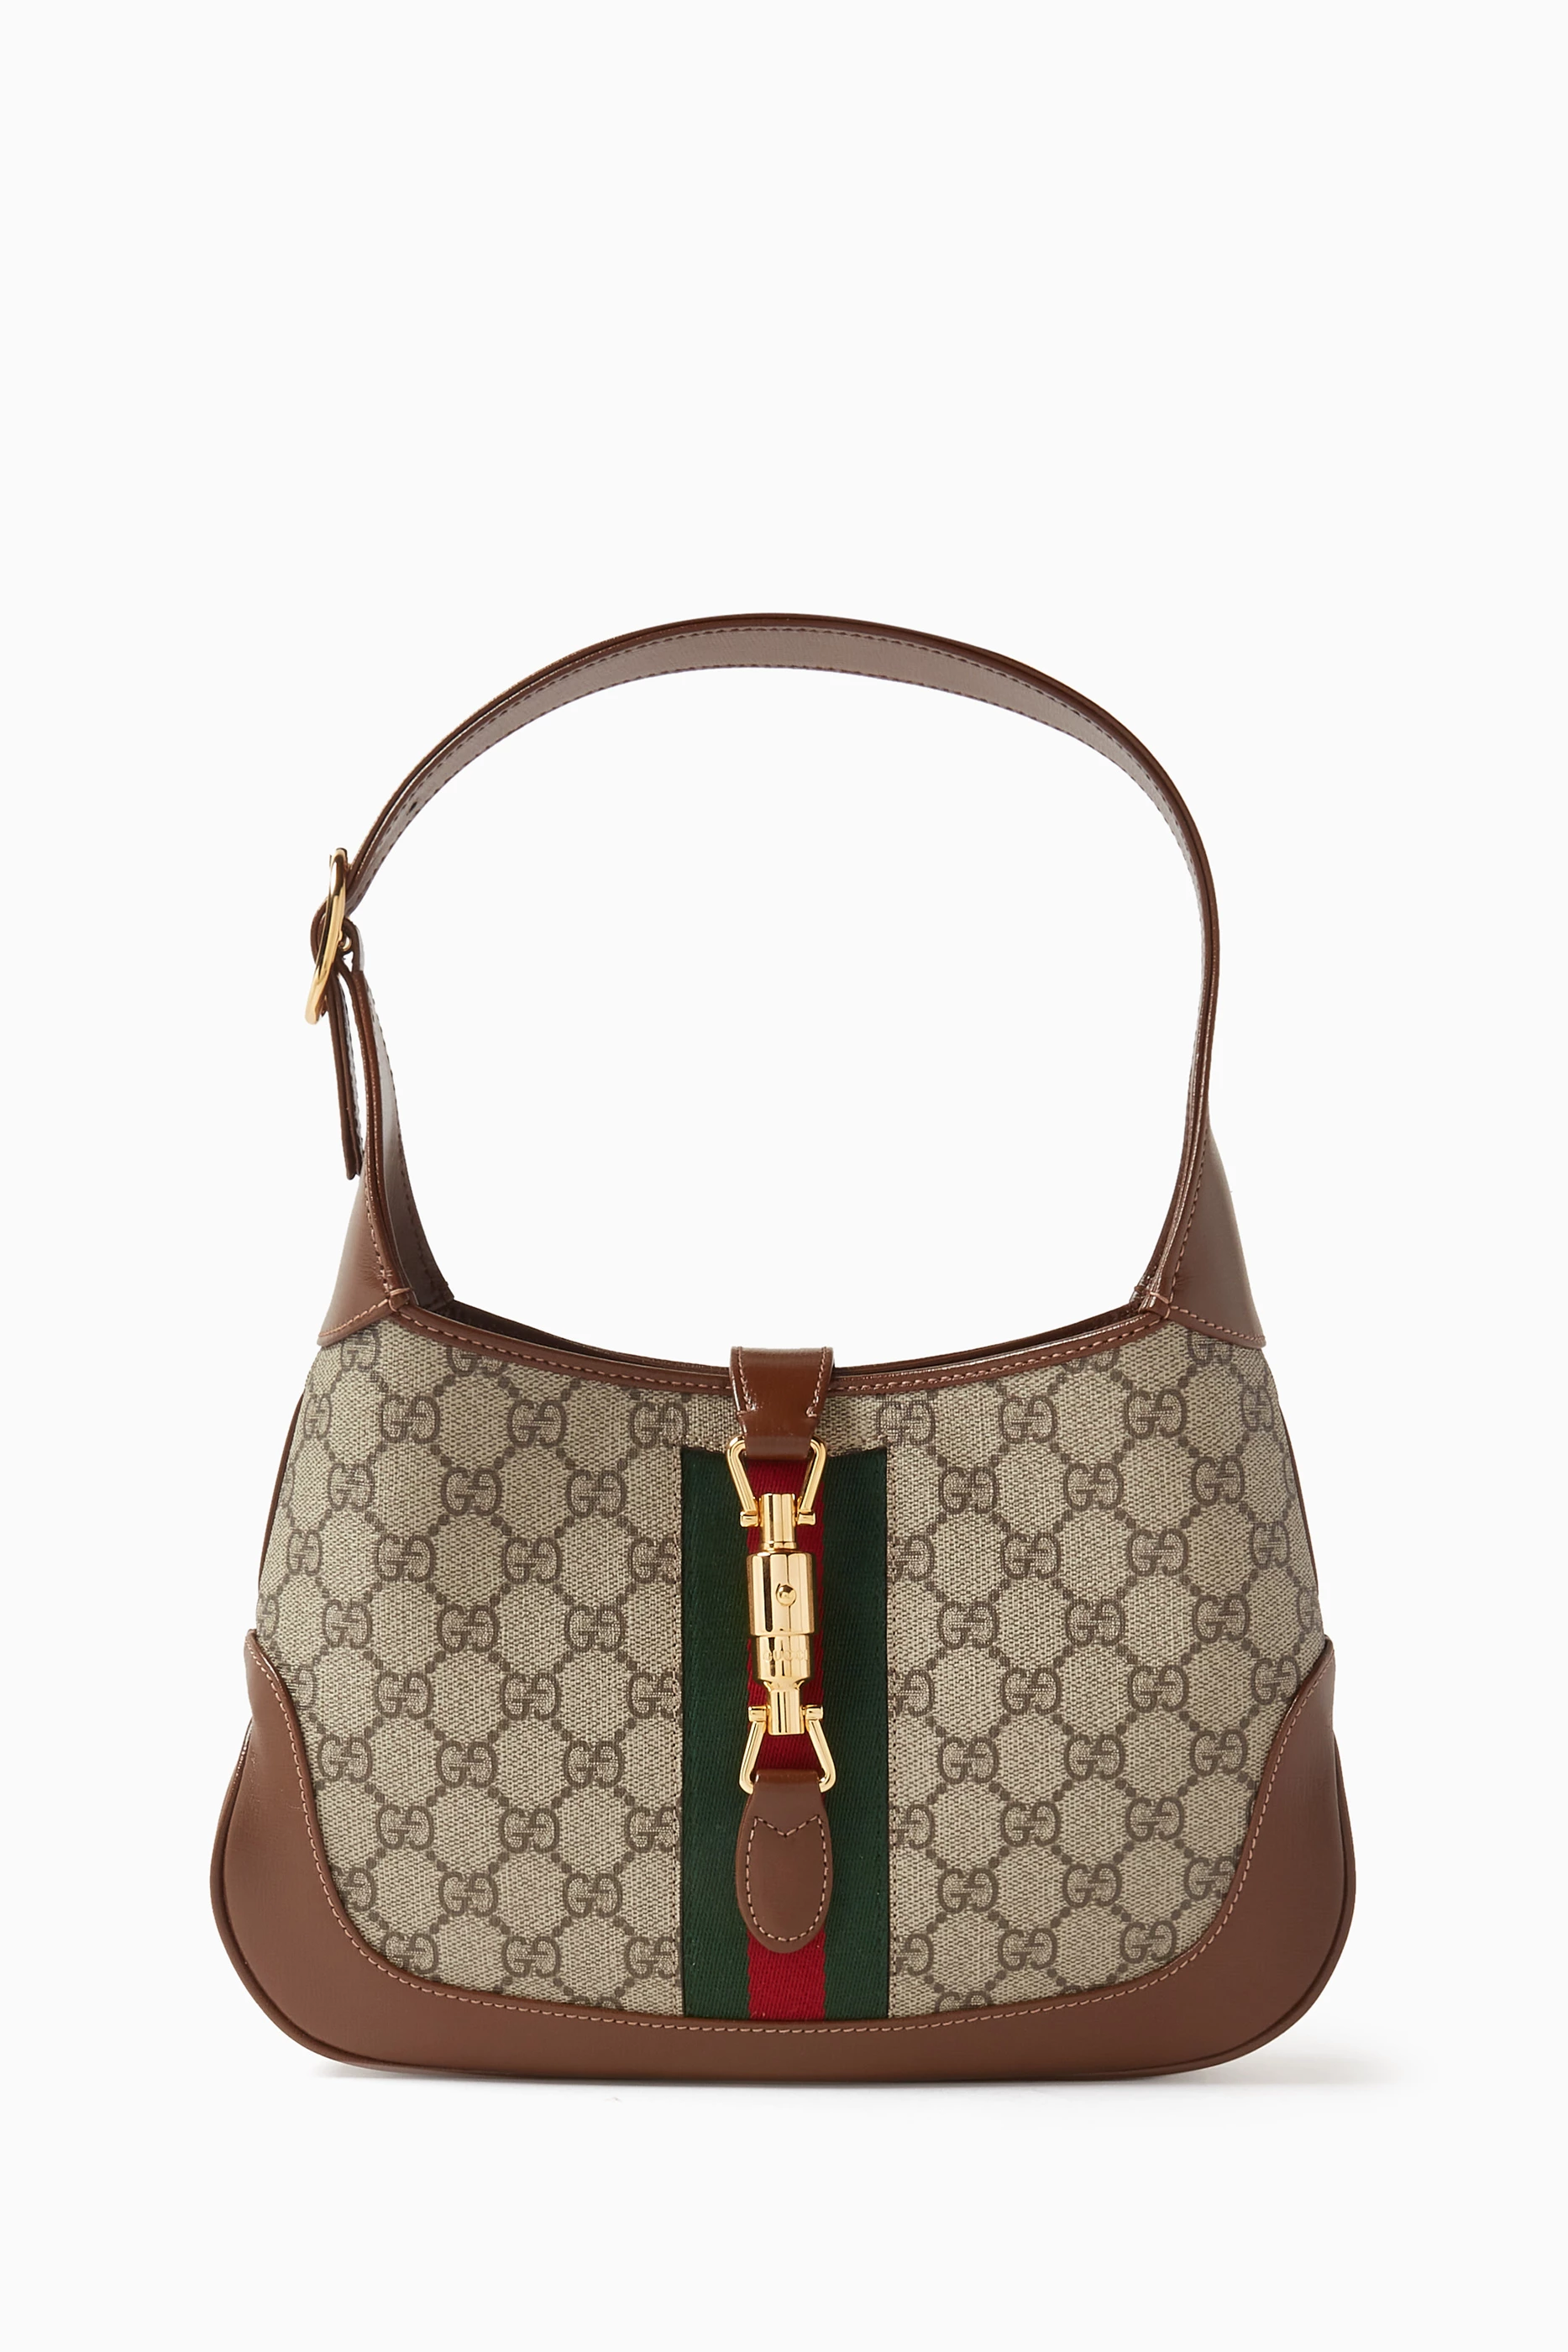 Unisex Pre-Owned Authenticated Gucci The Hacker Project GG Supreme Jackie  1961 Coated Canvas Fabric Brown Shoulder Bag 